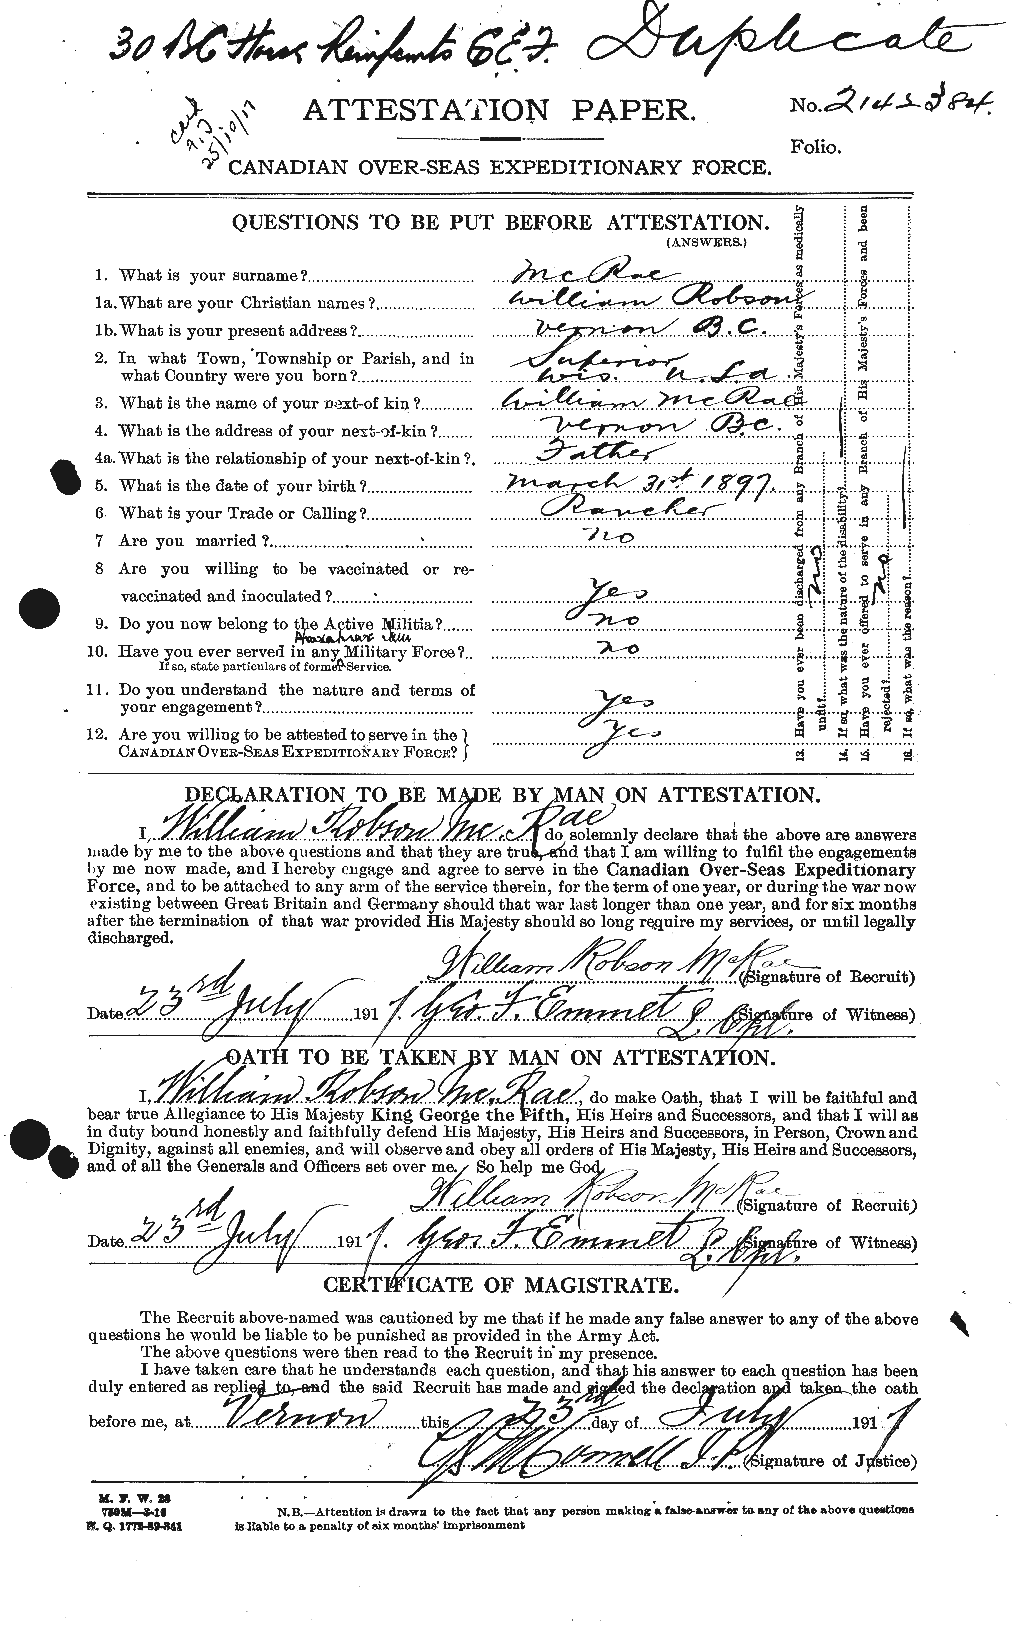 Personnel Records of the First World War - CEF 542999a